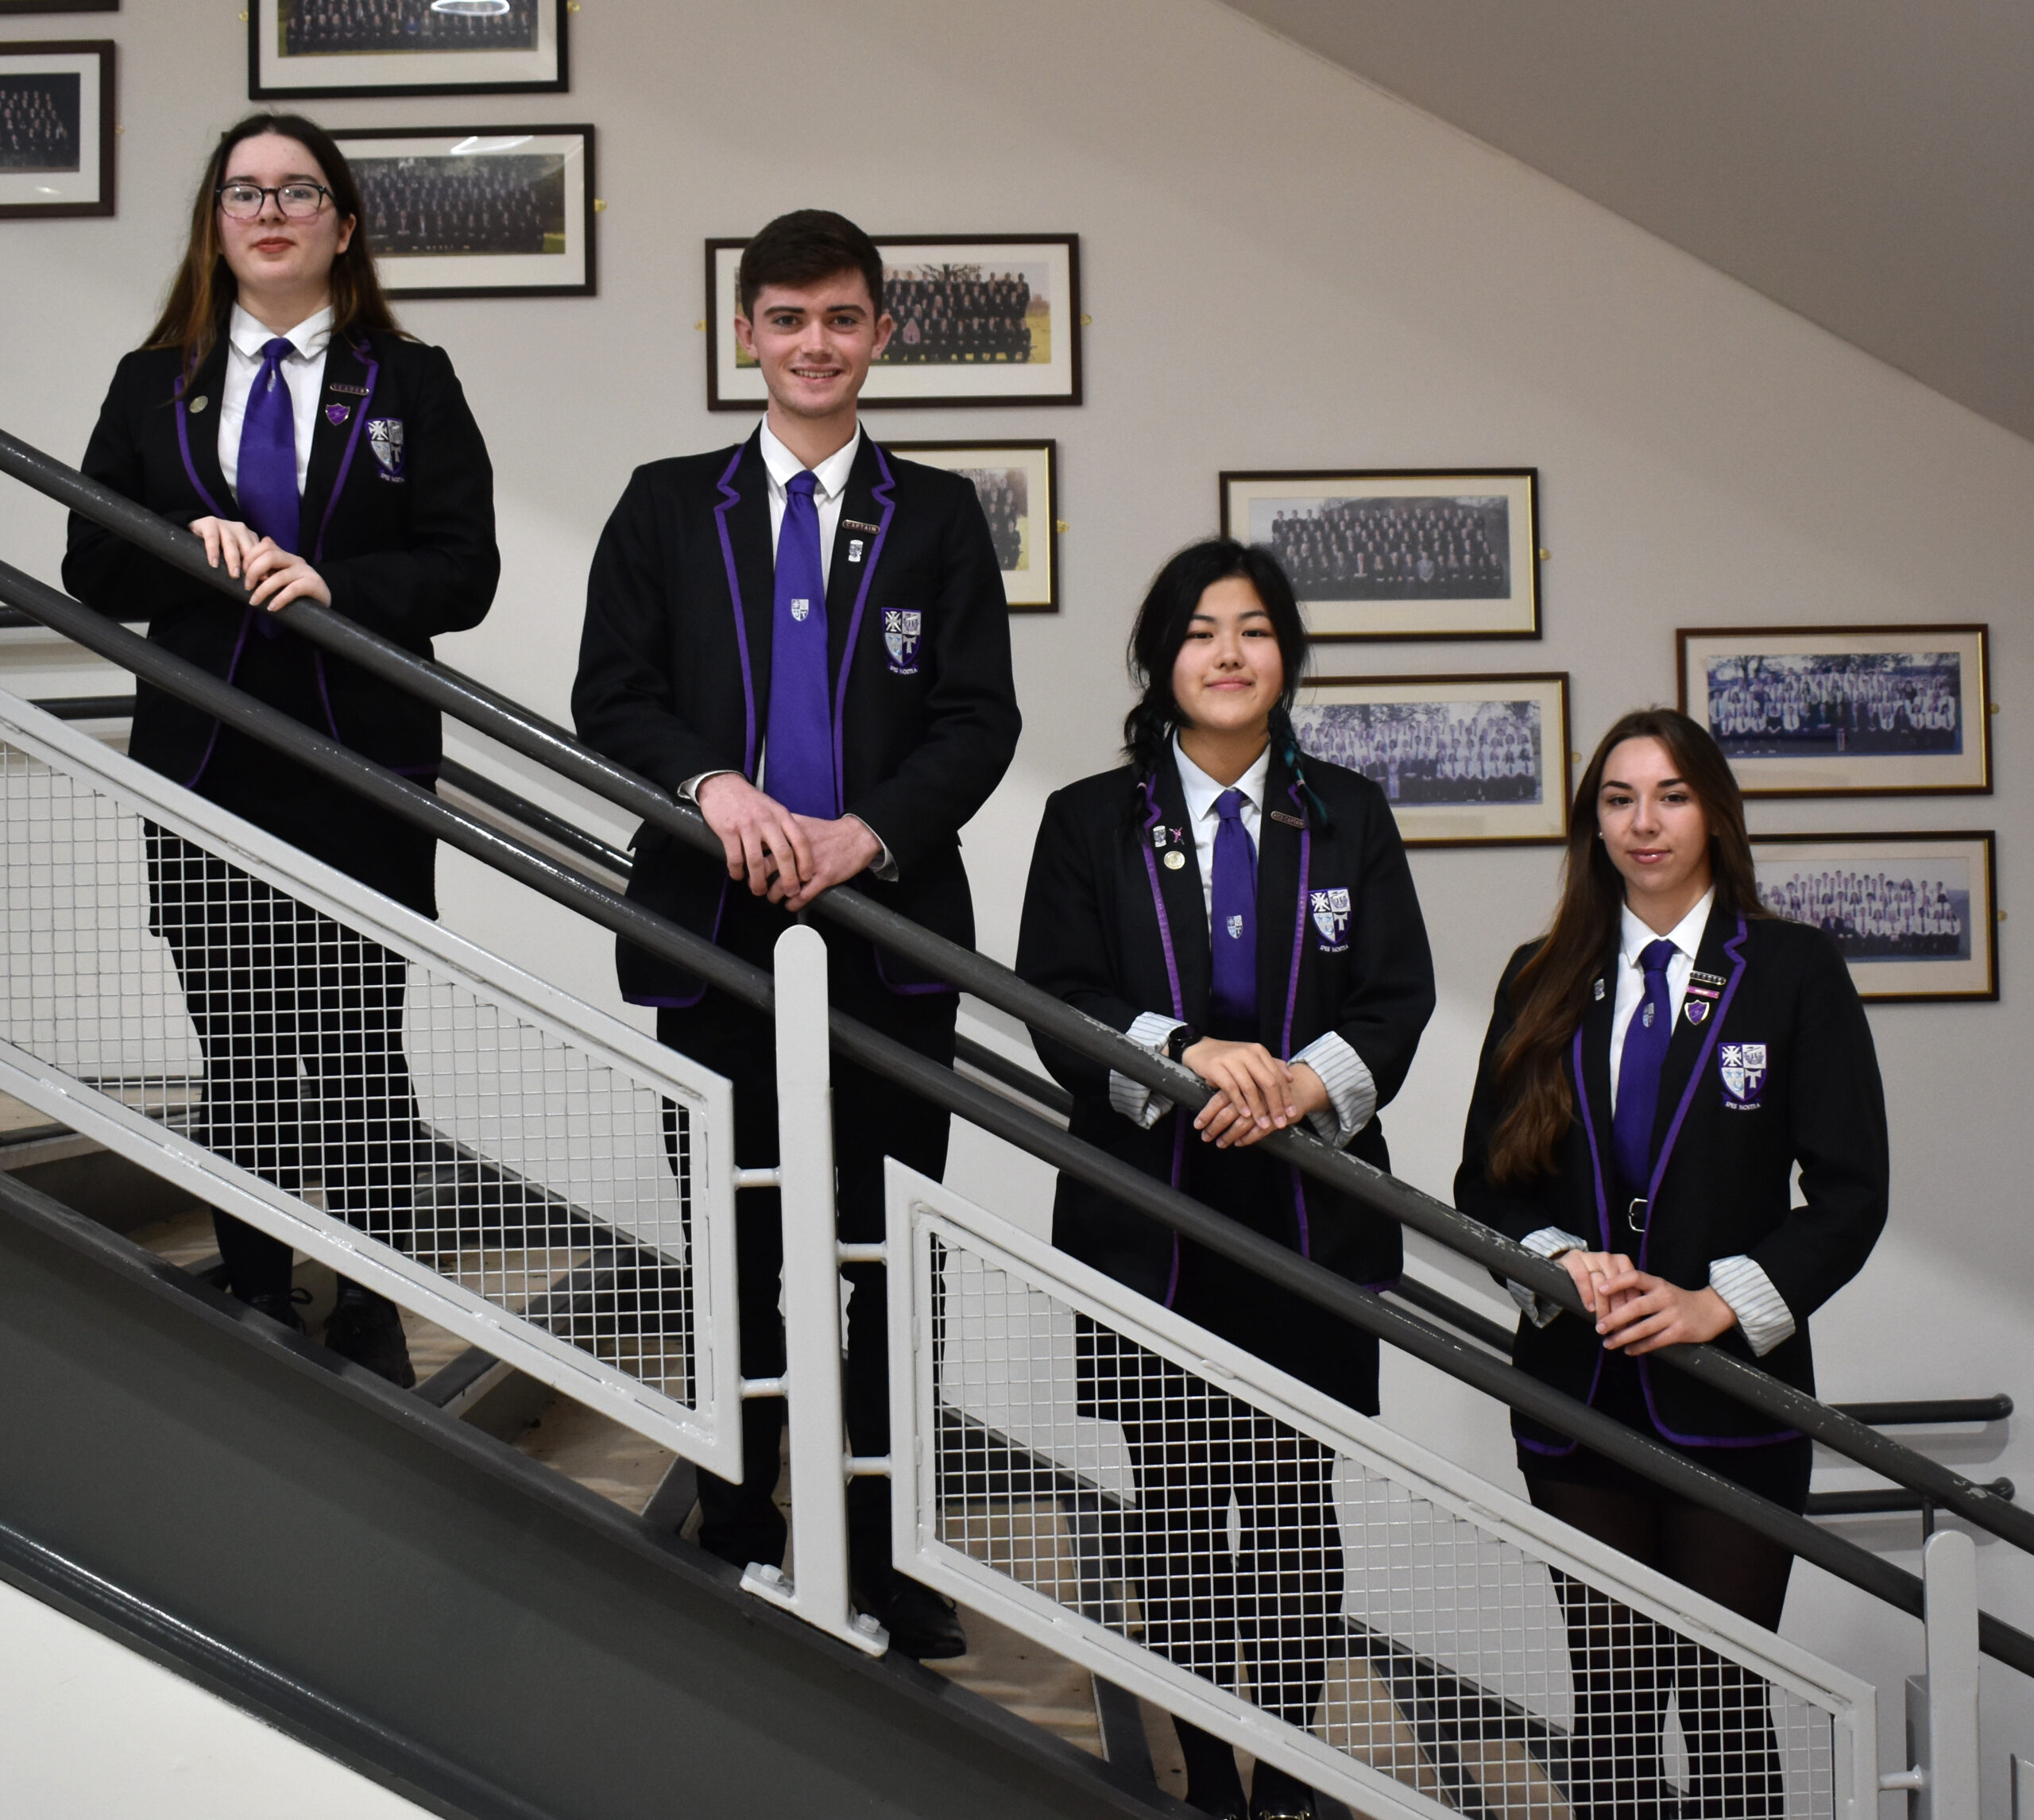 Holy Rood High School students show off their uniforms.